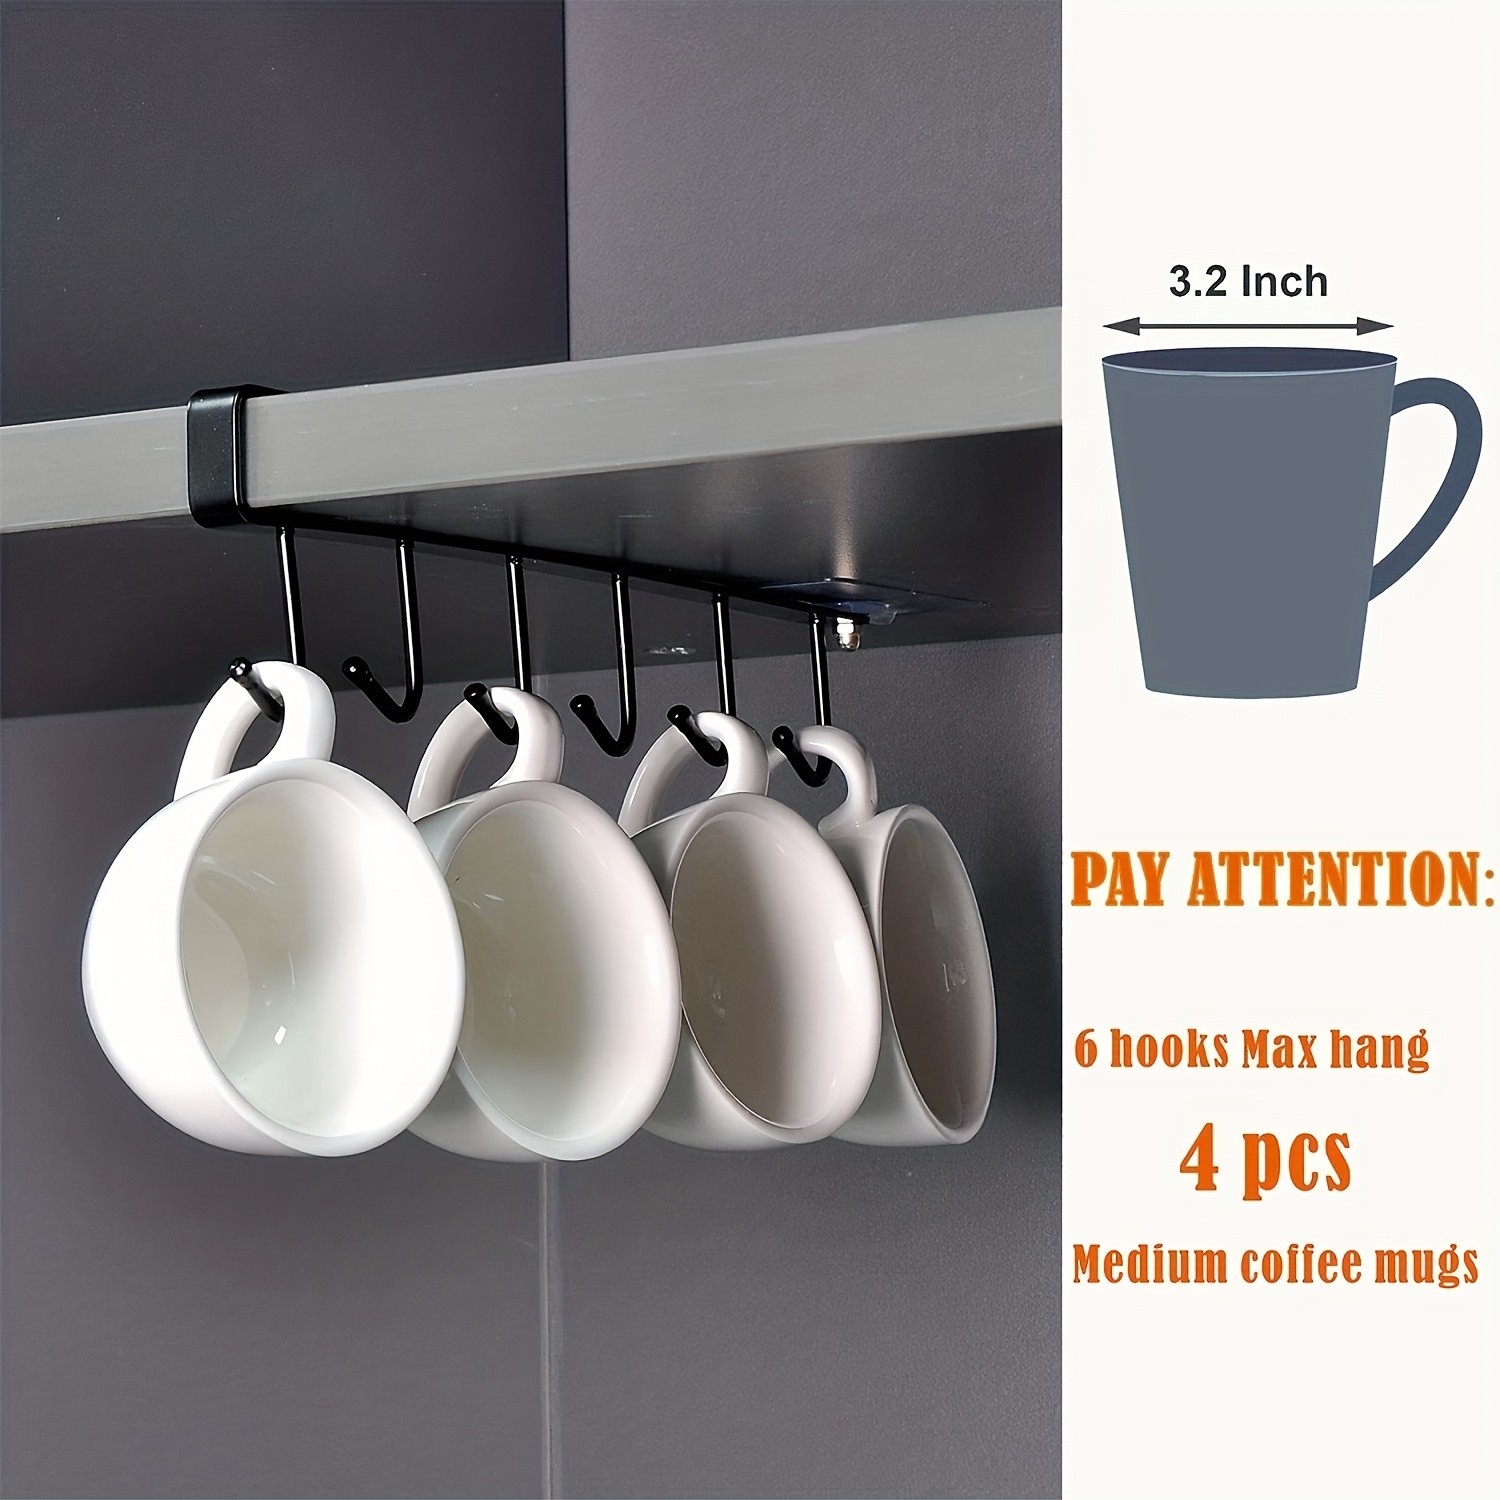 Yannee Cup Holder Under Cabinet - 6 Hook Coffee Cup Mug Holder for Kitchen, Fit for 1 inch Thickness Shelf or Less - Only Fit for Flat Buttom Cabinet